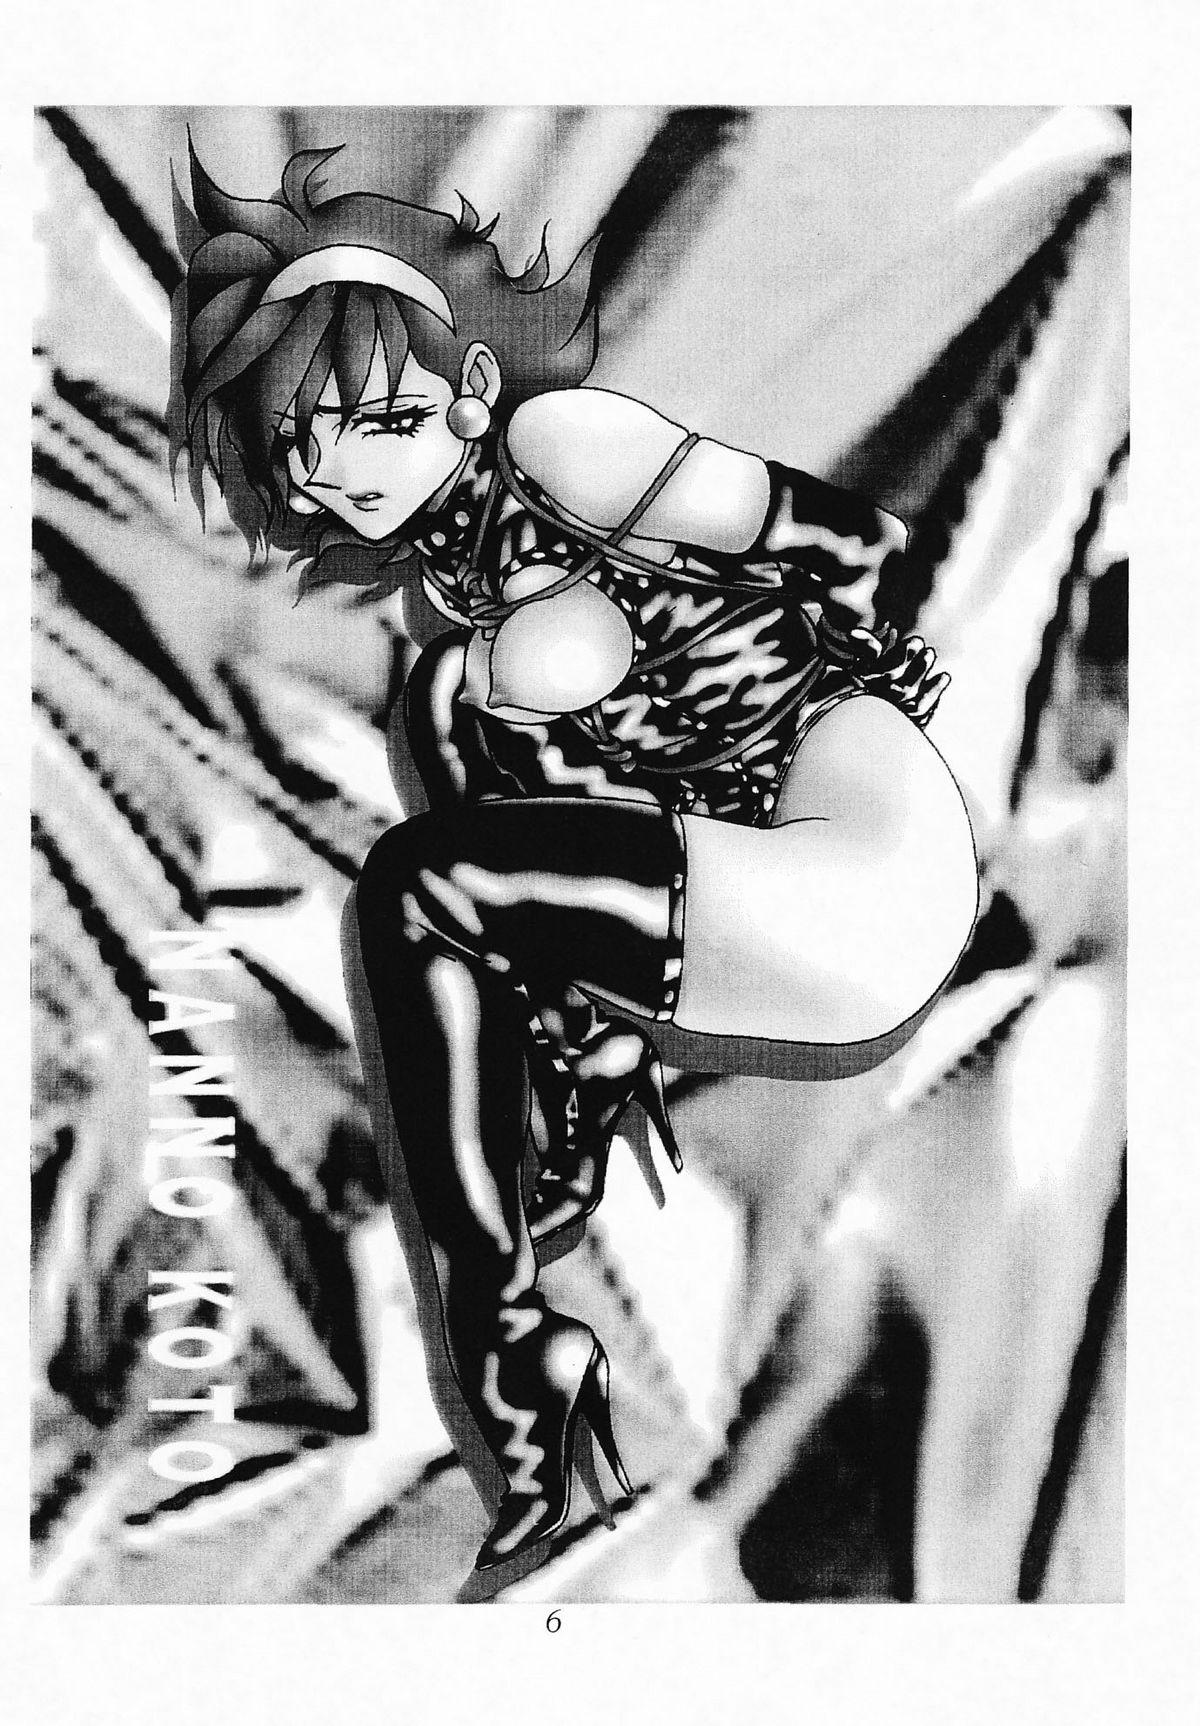 Hot Girls Fucking Douga Komusume 6 Limited - Magic knight rayearth Ghost sweeper mikami G gundam Lord of lords ryu knight Battle arena toshinden Amateur Blow Job - Page 8